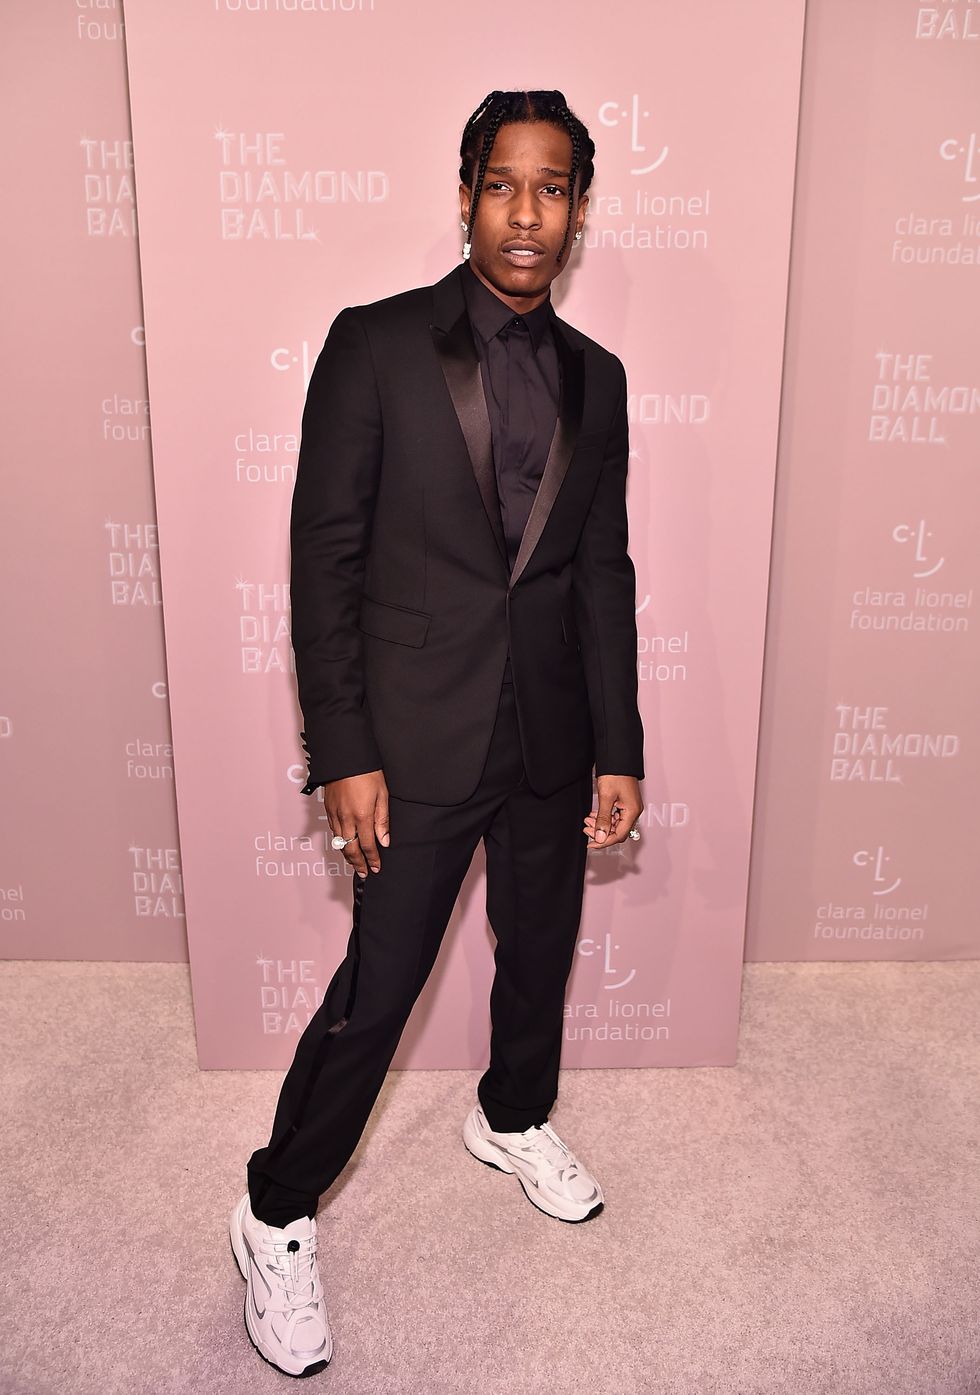 new york, ny   september 13  asap rocky attends rihannas 4th annual diamond ball at cipriani wall street on september 13, 2018 in new york city  photo by theo wargogetty images